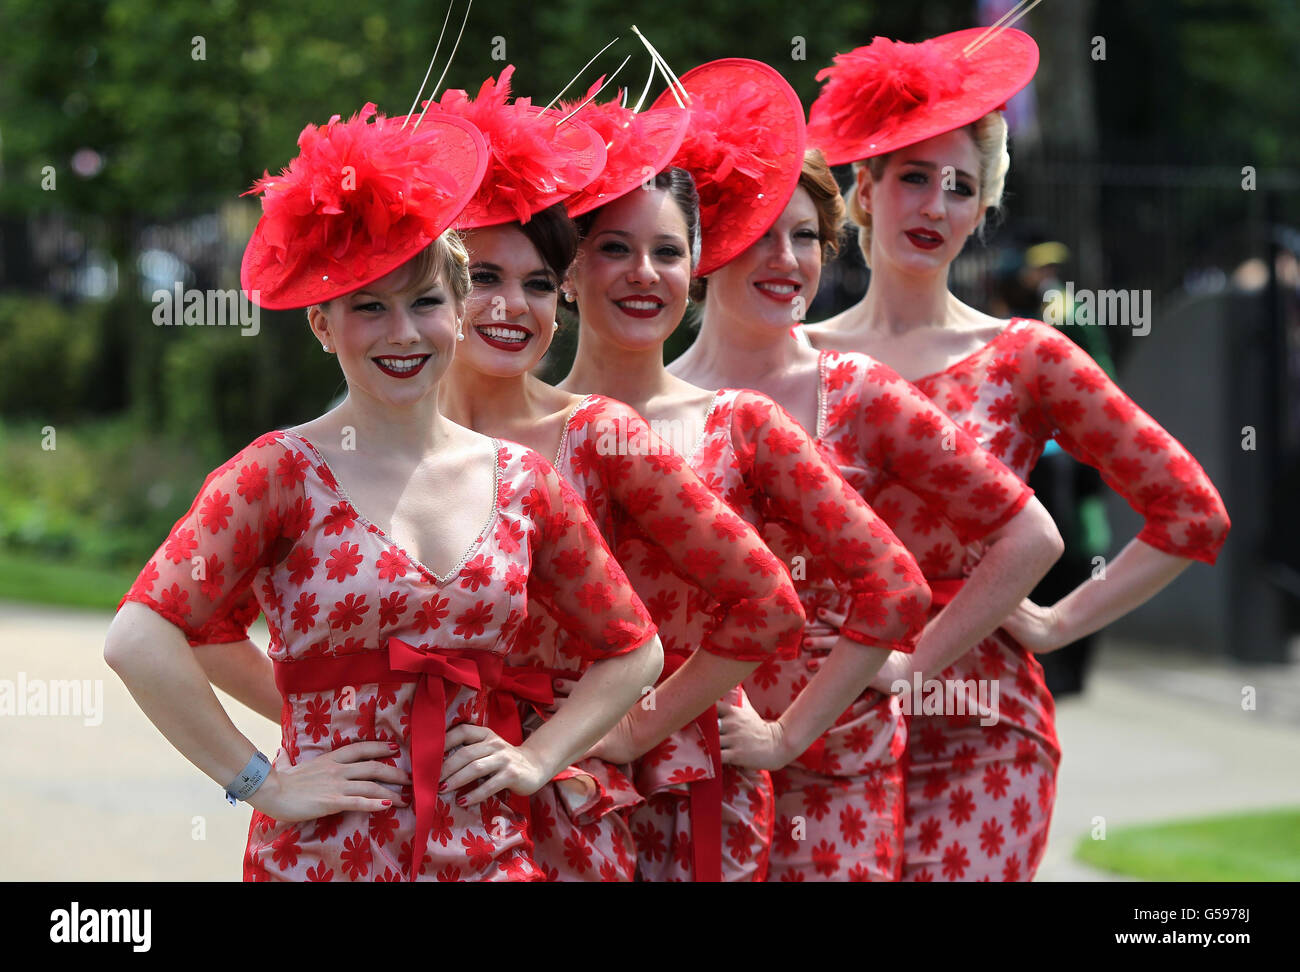 Horse Racing - The Royal Ascot Meeting 2012 - Day One - Ascot Racecourse. Racegoers attend the first day of Royal Ascot 2012 at Ascot Racecourse, Berkshire. Stock Photo